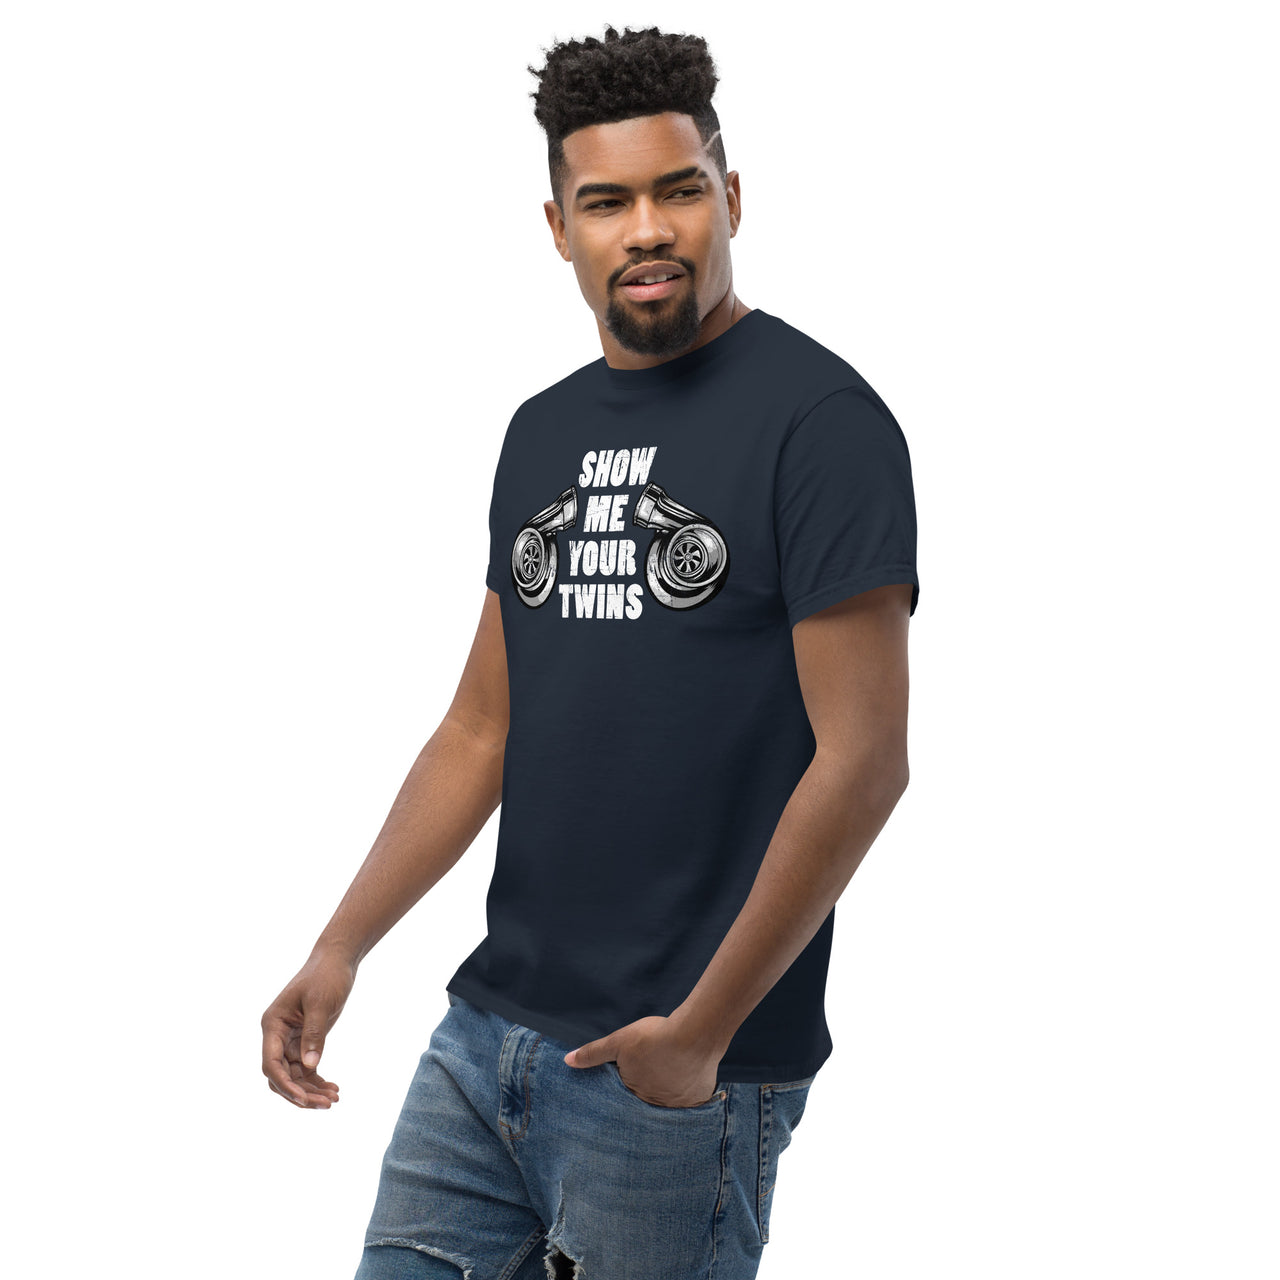 Show Me Your Twins Funny Turbo T-Shirt modeled in navy